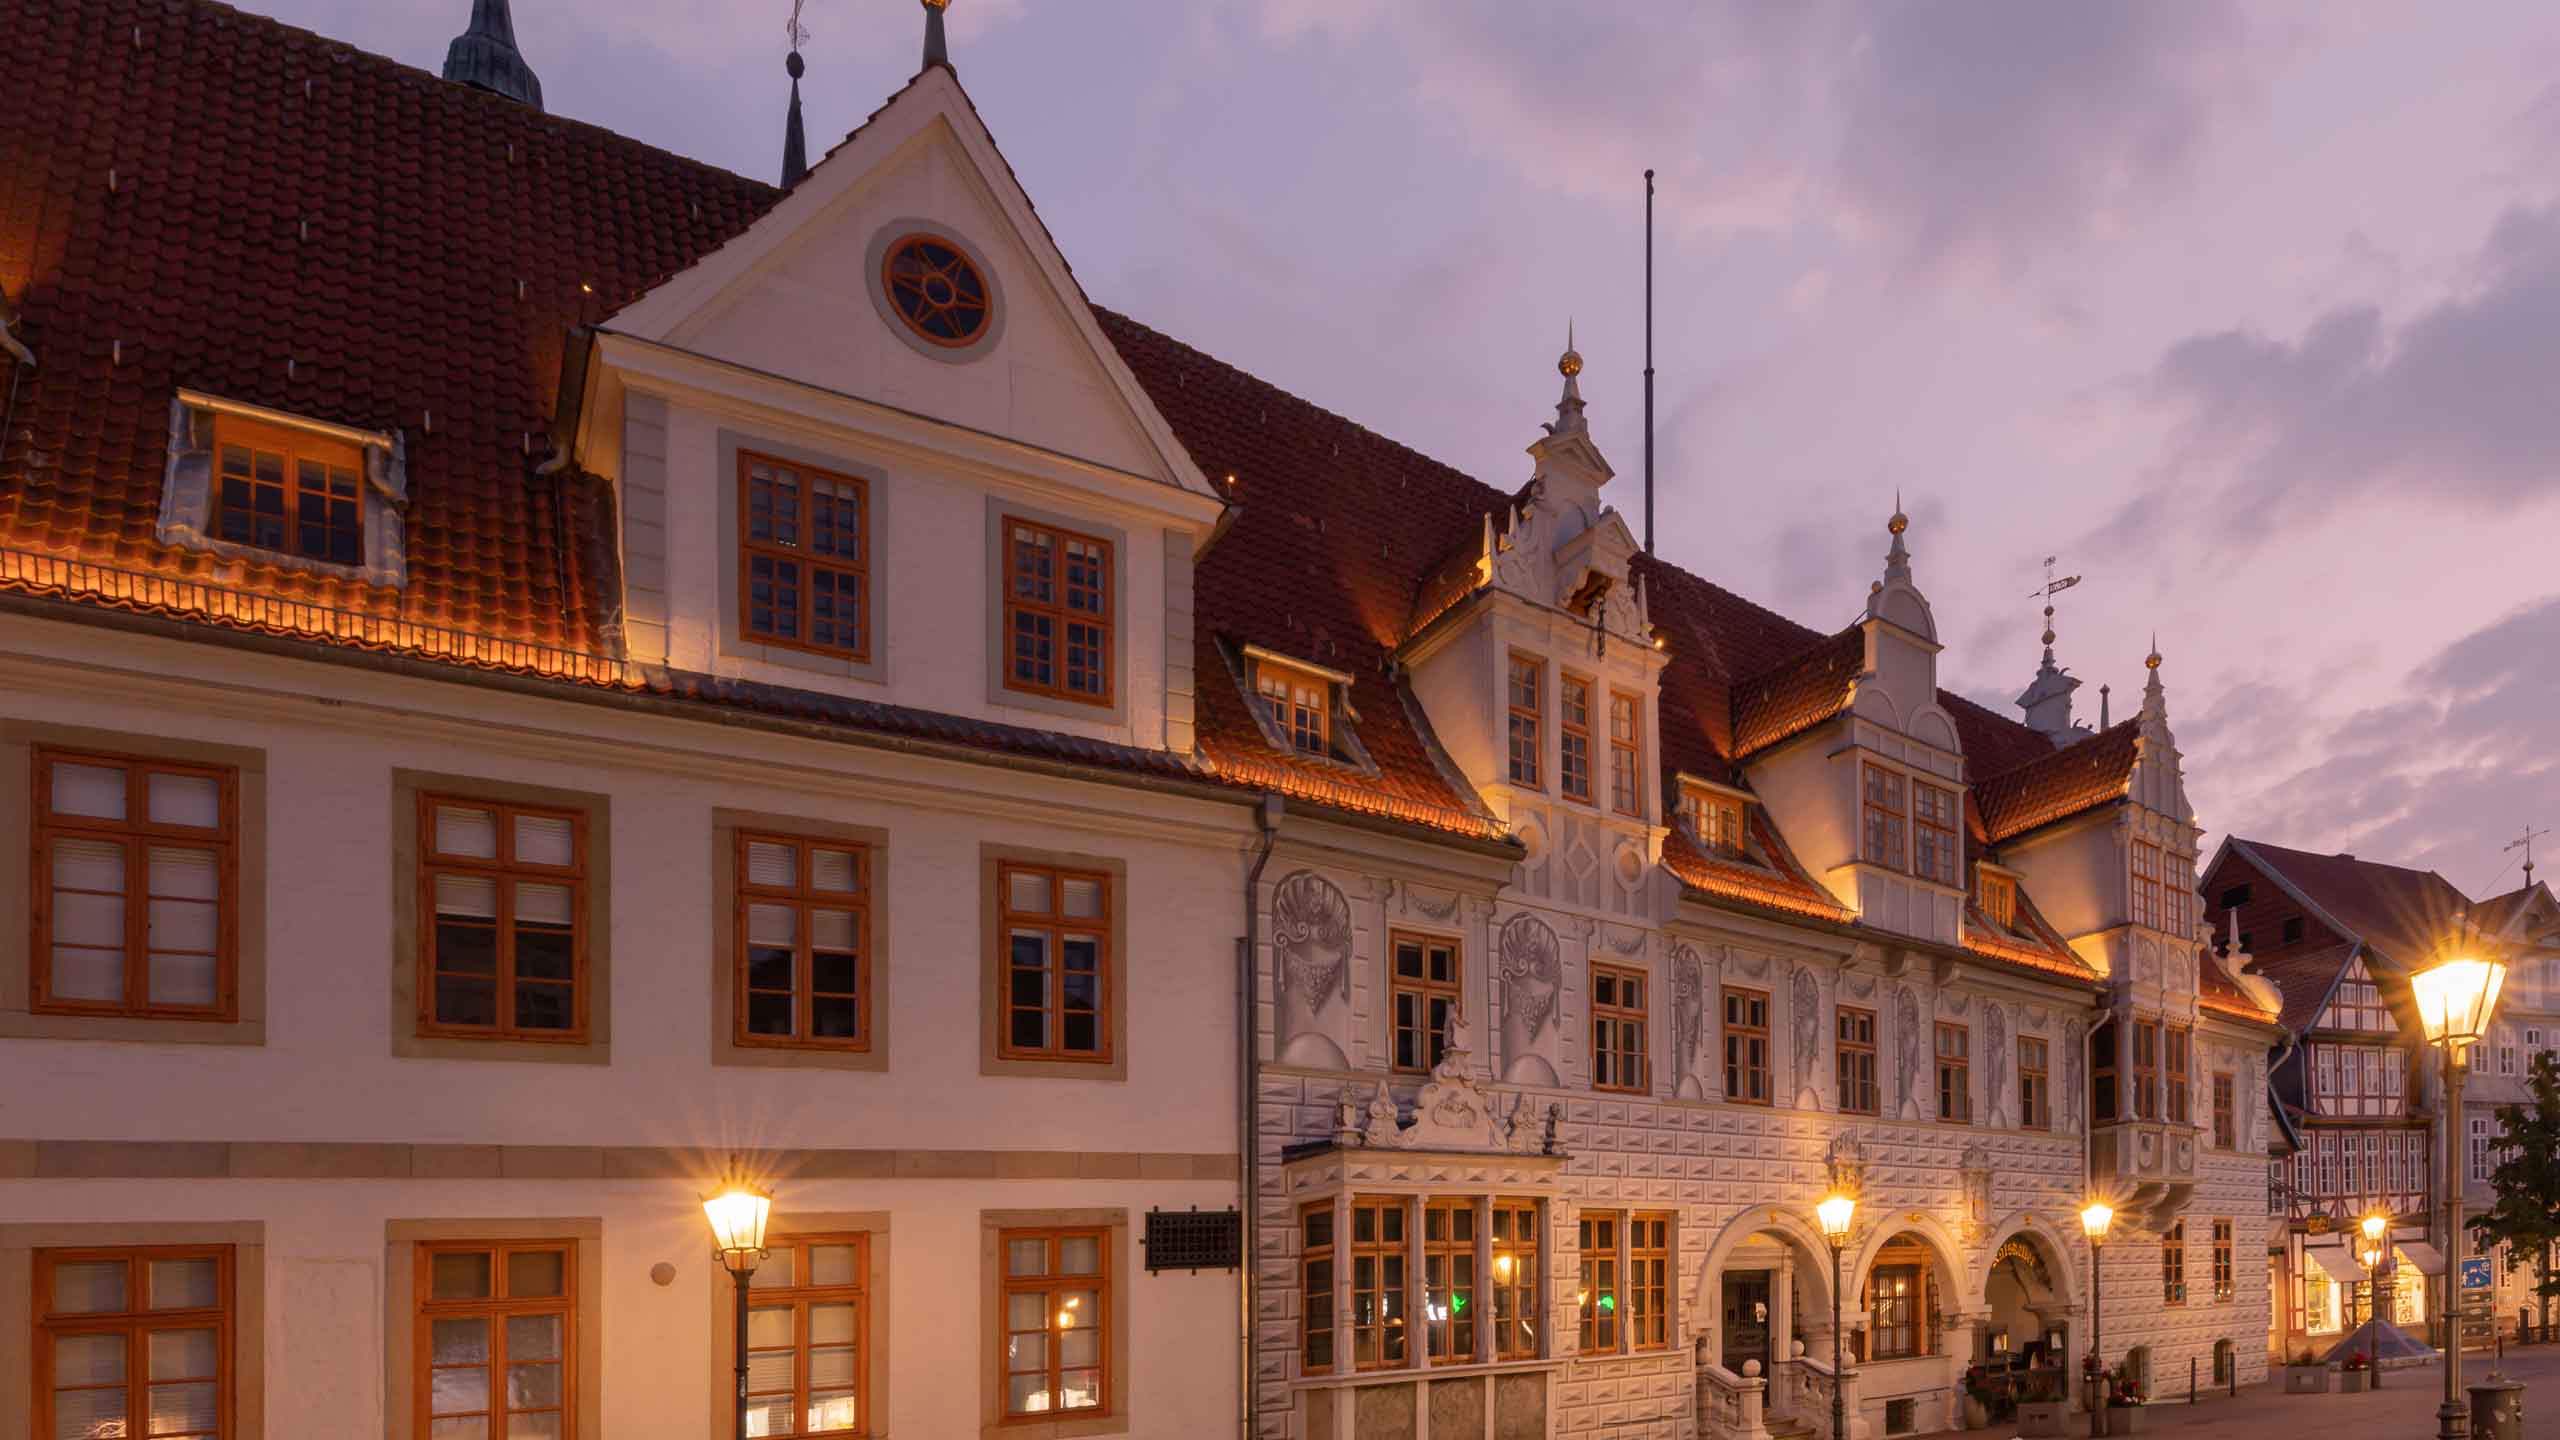 Old Town Hall in Celle in the evening